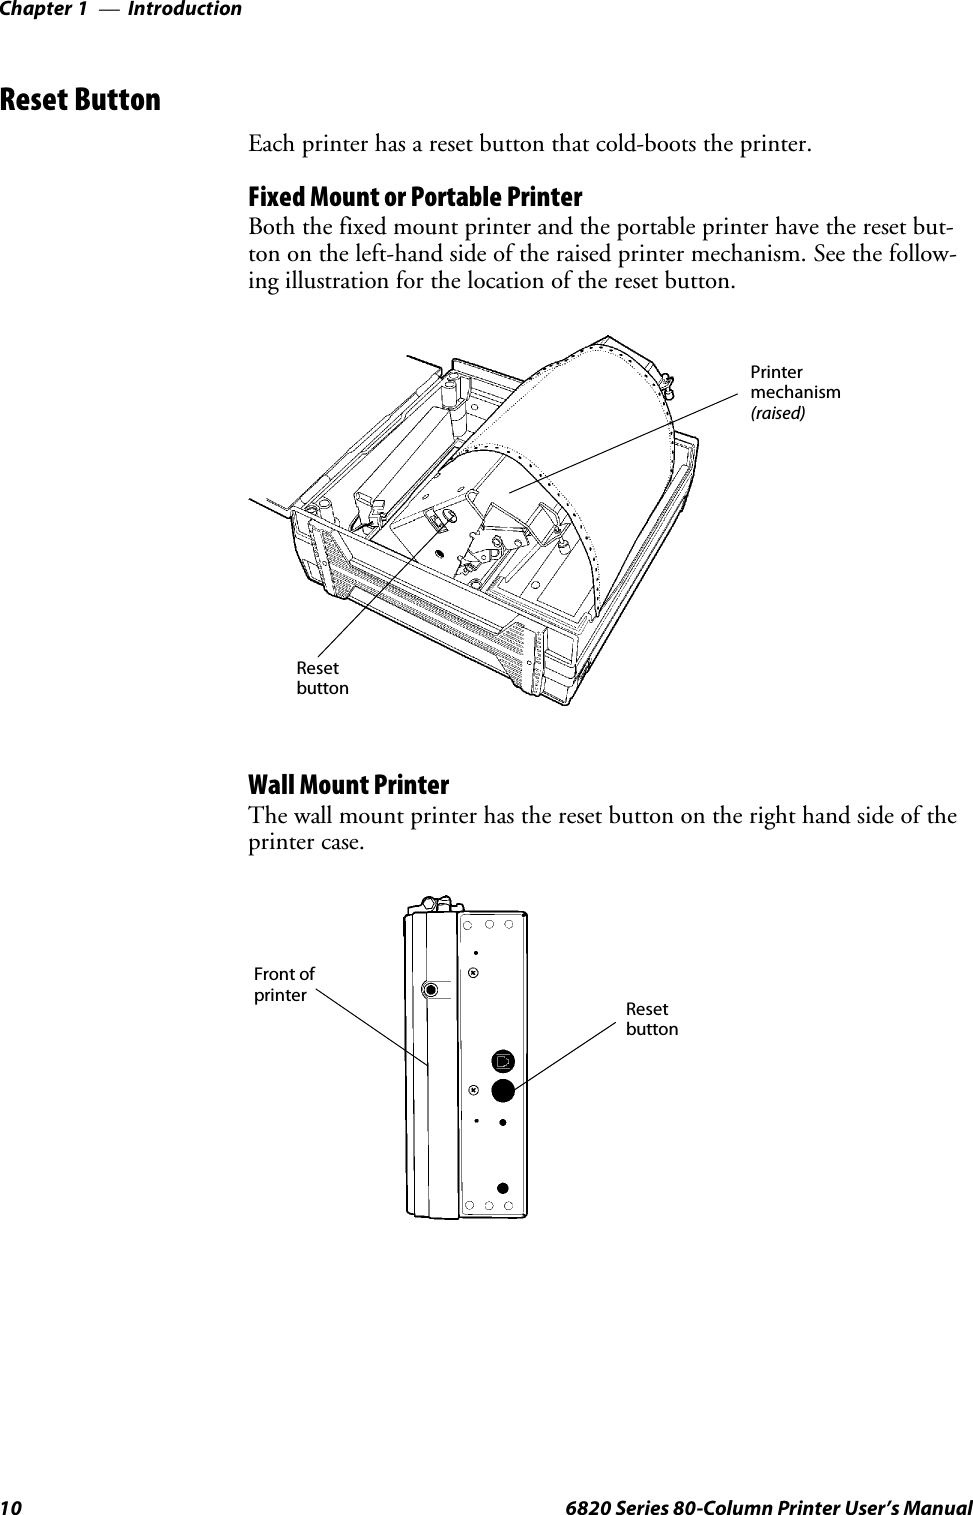 IntroductionChapter —110 6820 Series 80-Column Printer User’s ManualReset ButtonEach printer has a reset button that cold-boots the printer.Fixed Mount or Portable PrinterBoth the fixed mount printer and the portable printer have the reset but-ton on the left-hand side of the raised printer mechanism. See the follow-ing illustration for the location of the reset button.ResetbuttonPrintermechanism(raised)Wall Mount PrinterThe wall mount printer has the reset button on the right hand side of theprinter case.ResetbuttonFront ofprinter